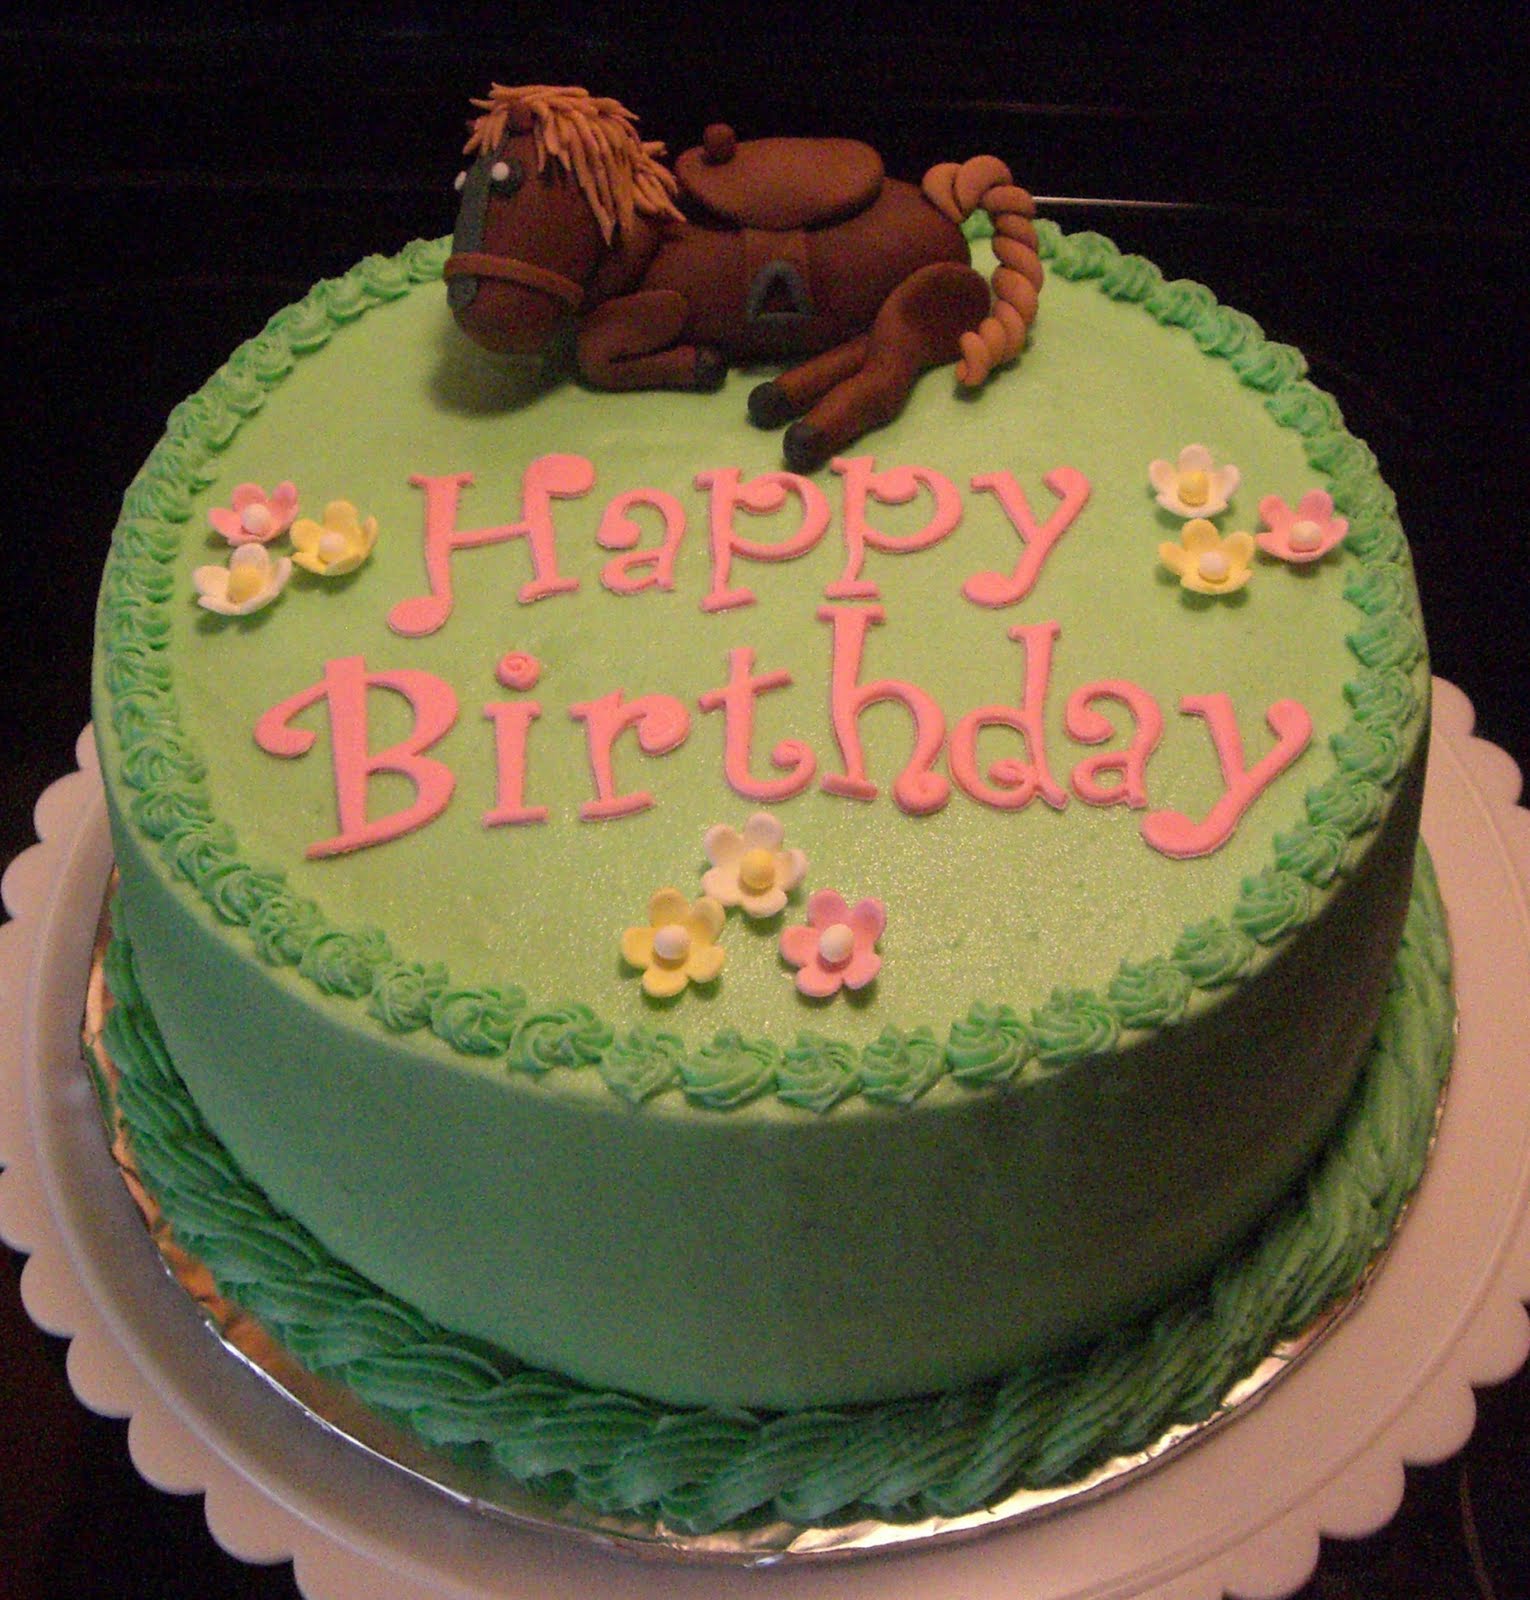 horse cake birthday cakes lover inch chocolate fondant buttercream pans paste gum decoration place summer littlebcakes